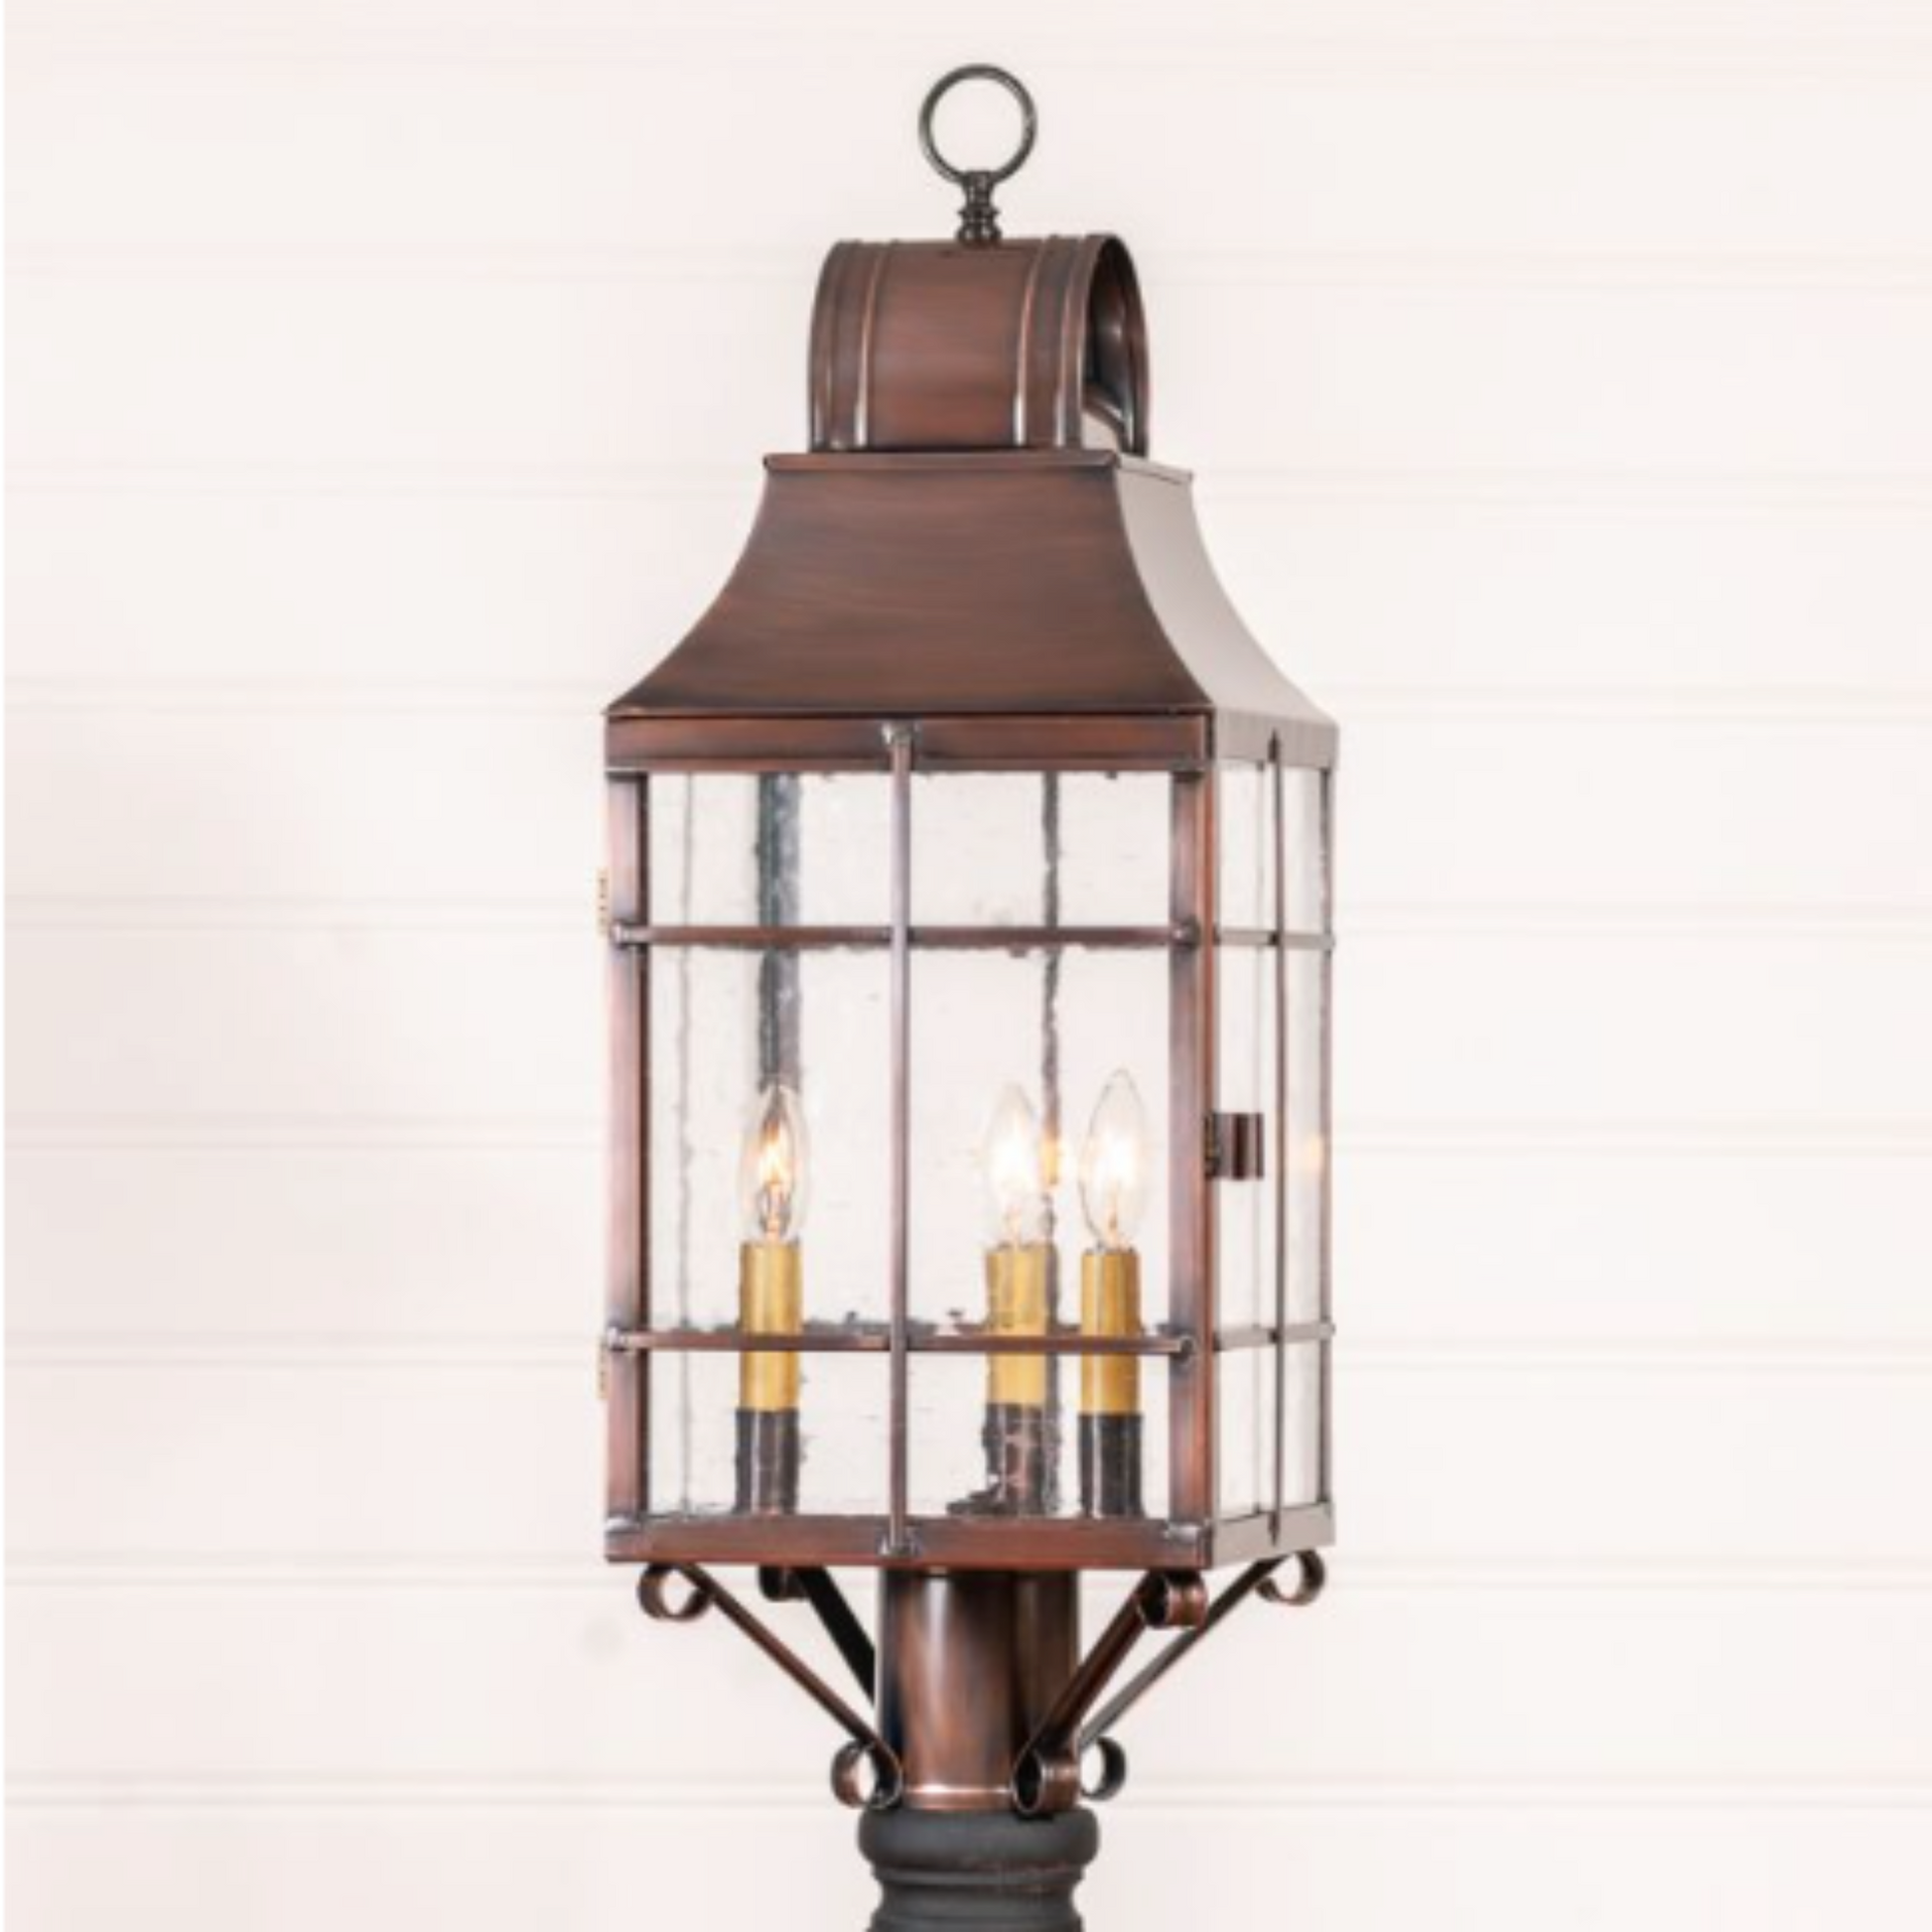 Vintage | French Colonial | Post Lantern